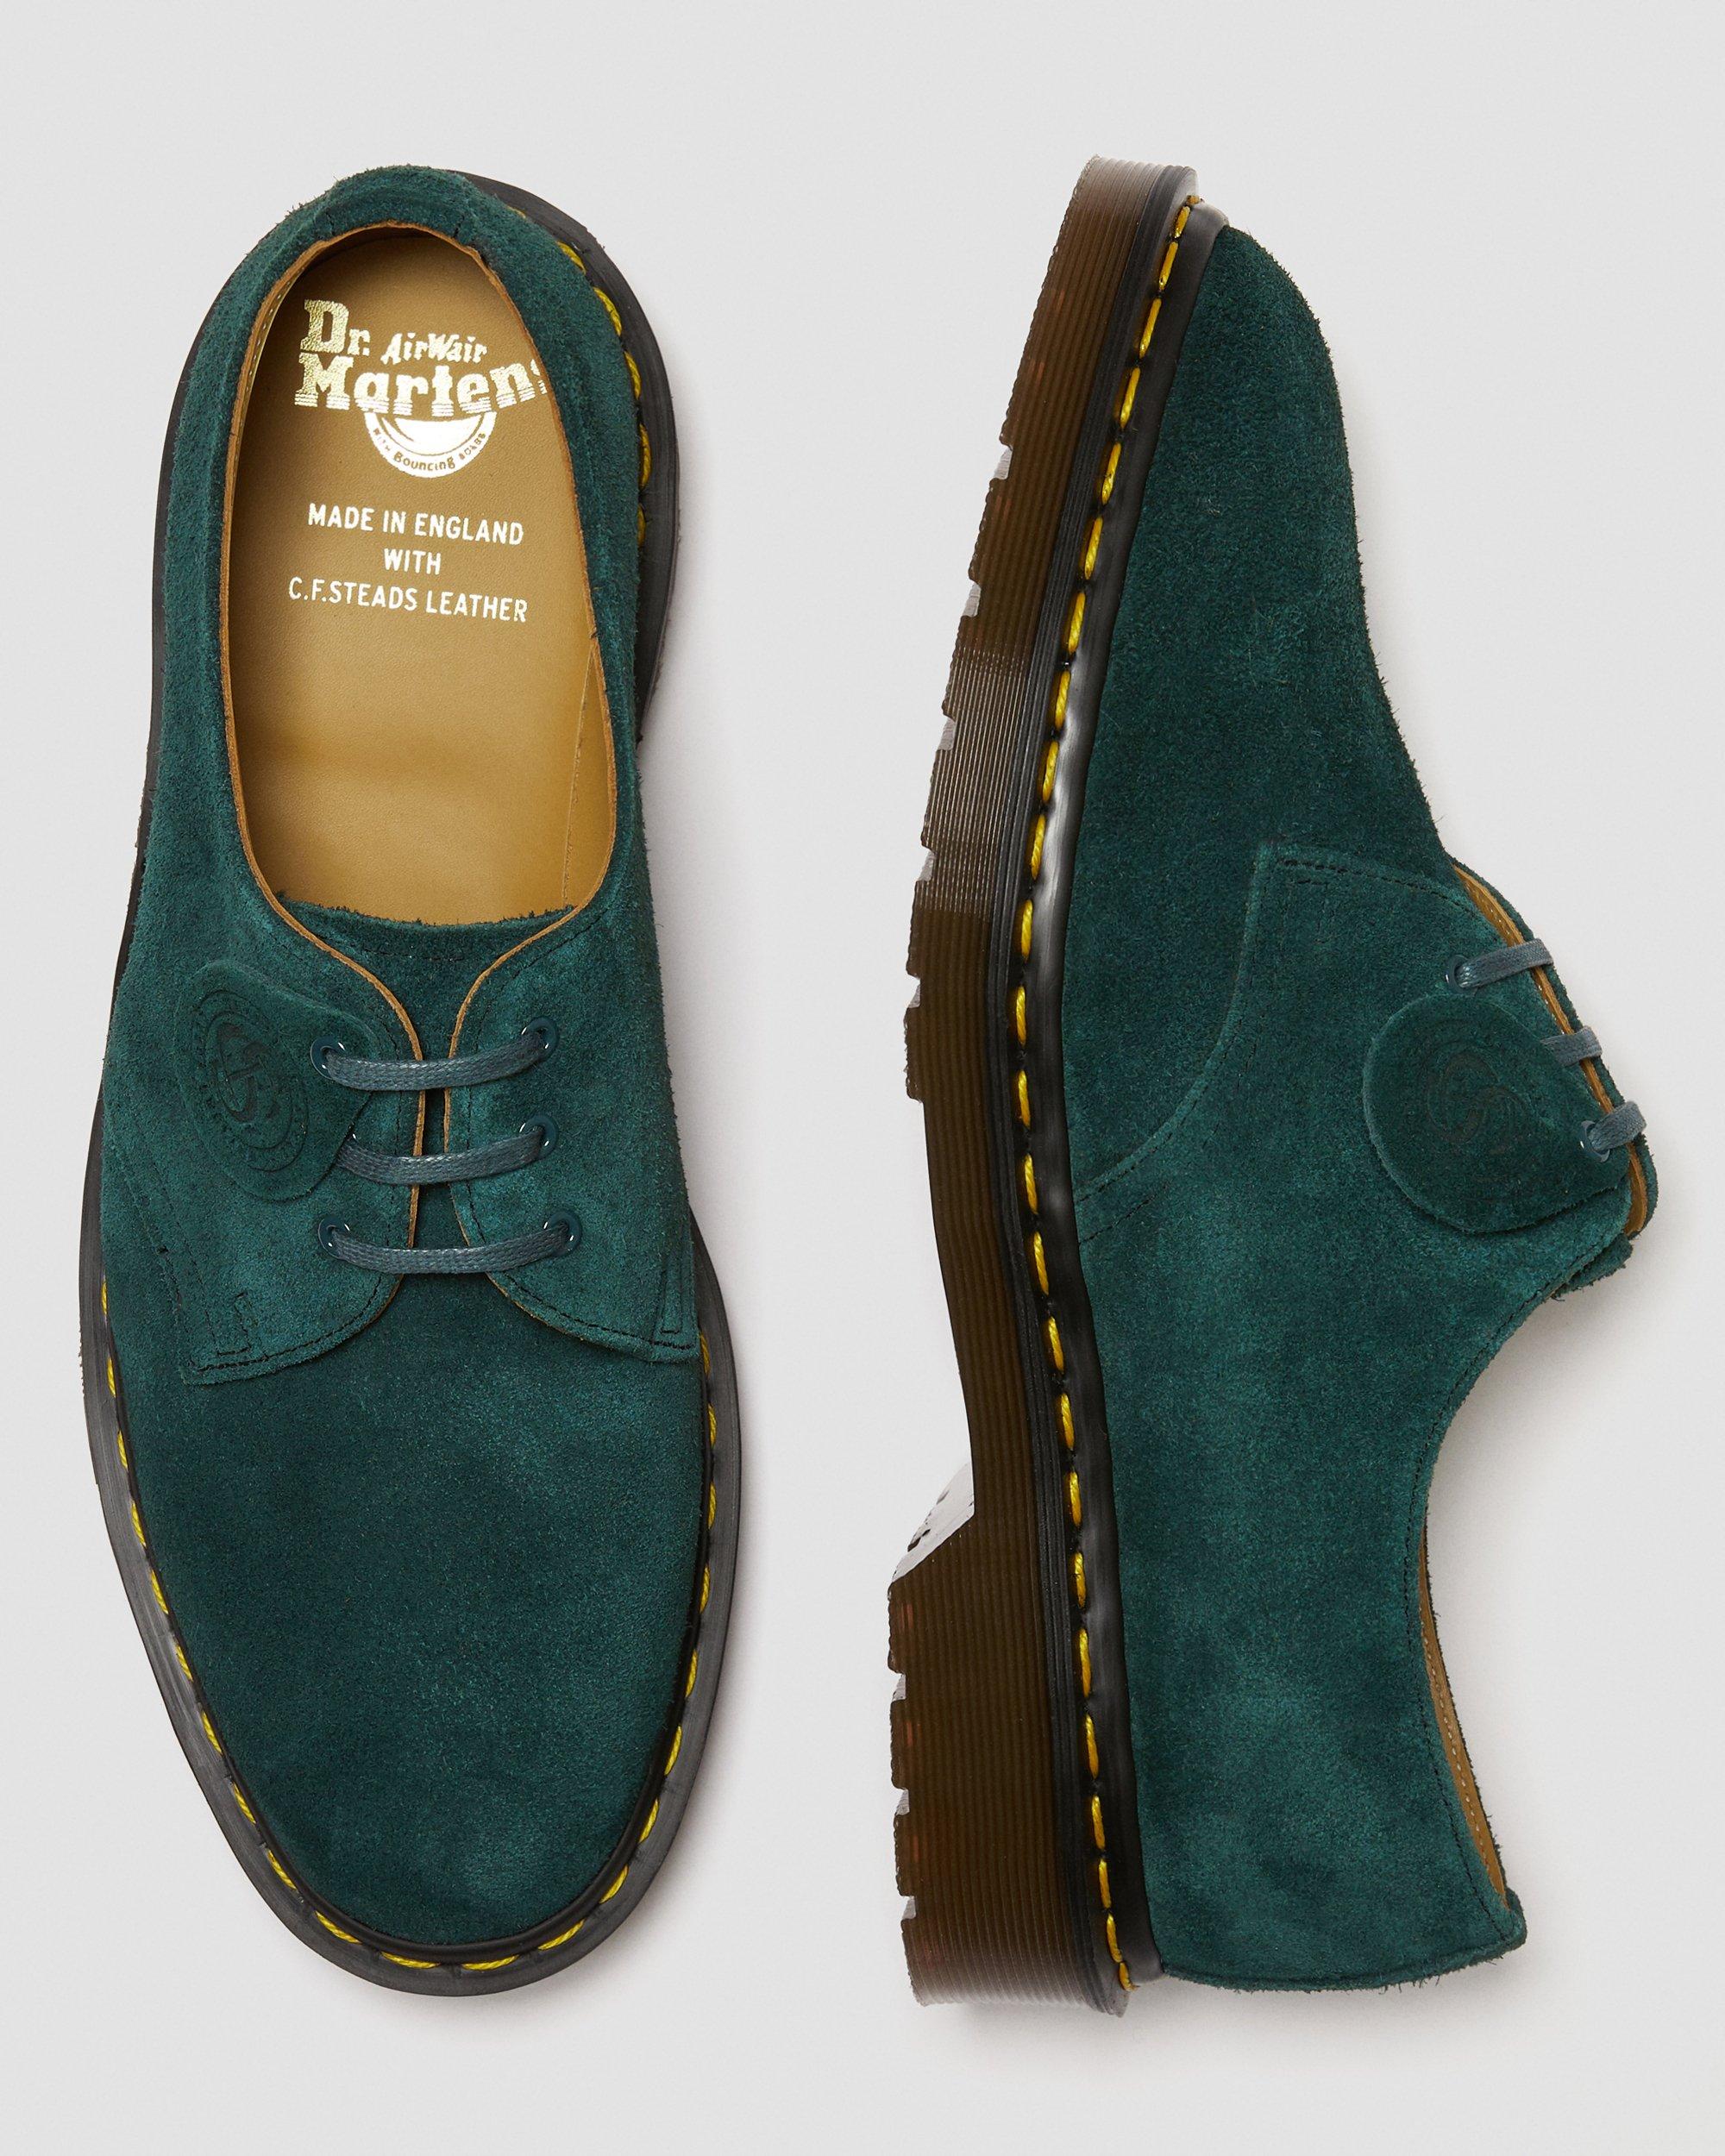 1461 Made In England Suede Oxford Shoes, Green | Dr. Martens